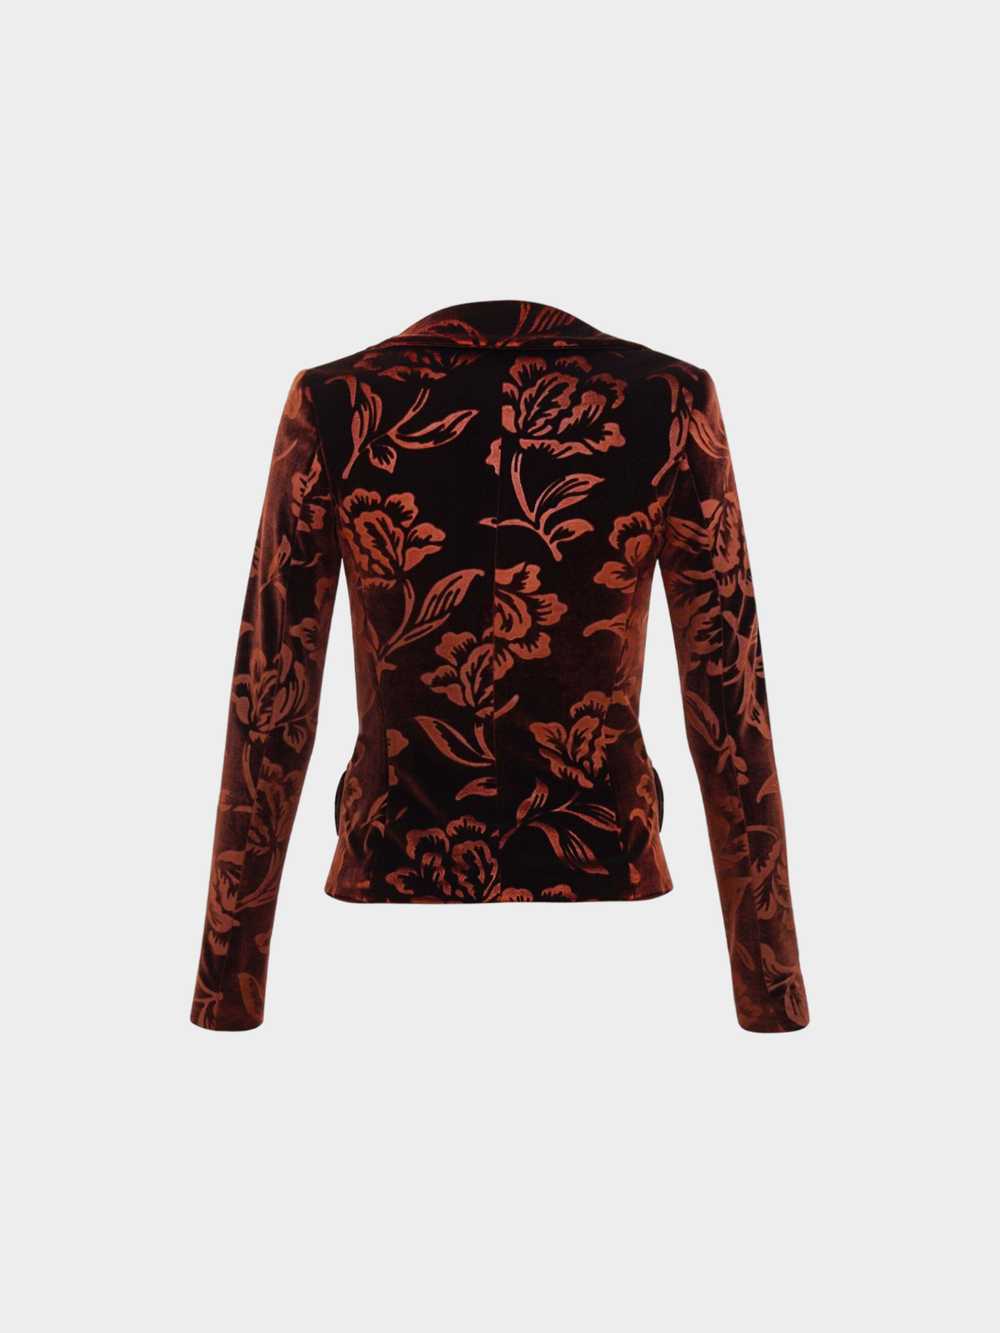 Dolce & Gabbana 2000s Brown Velour Floral Printed… - image 2